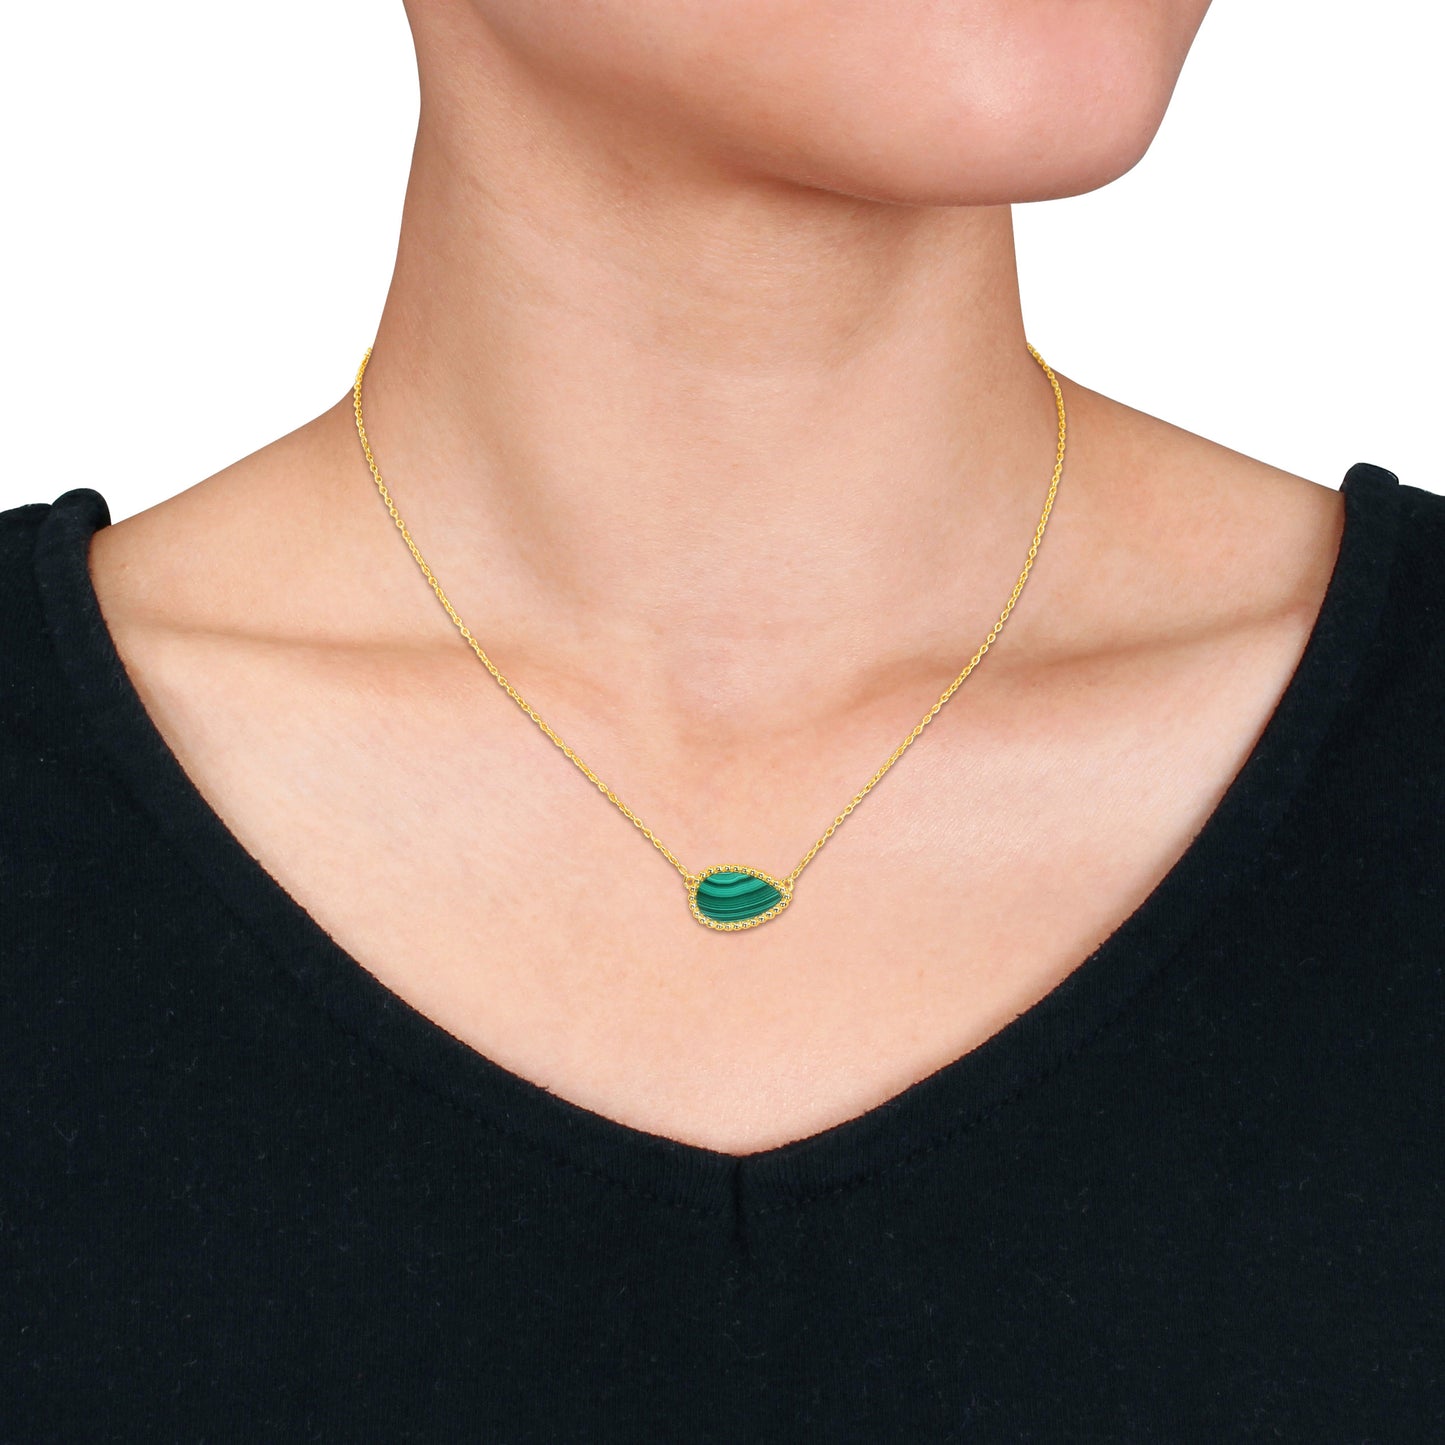 4 CT Pear Shaped Gemstone Necklace